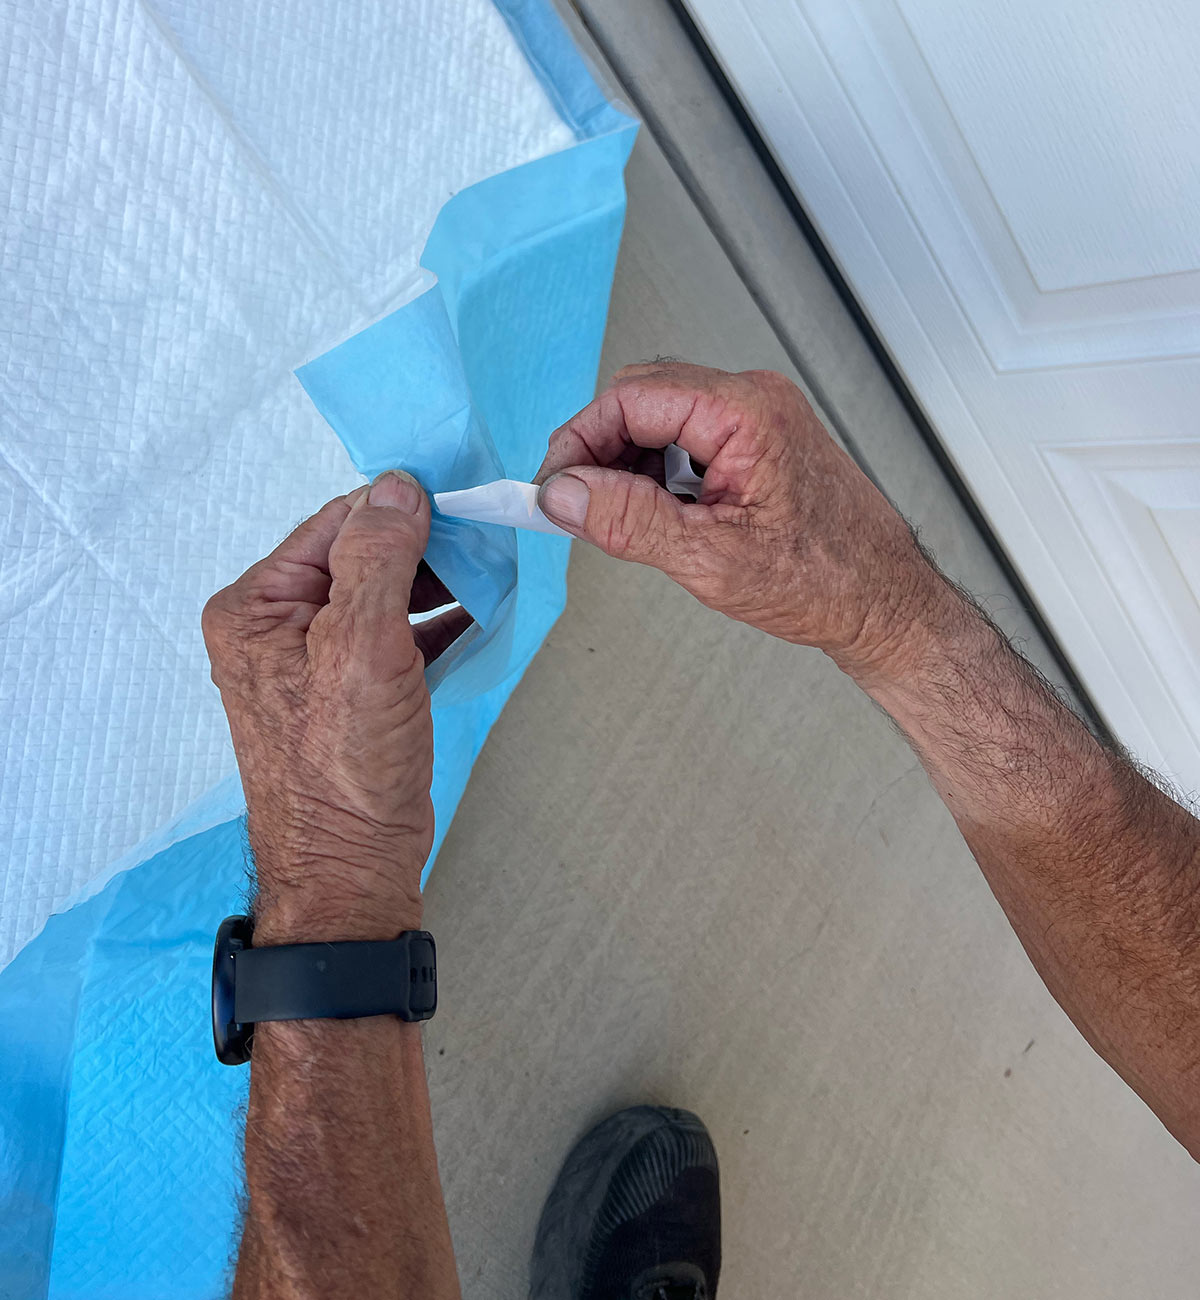 hands pull back an adhesive tab on the piddle pad corner